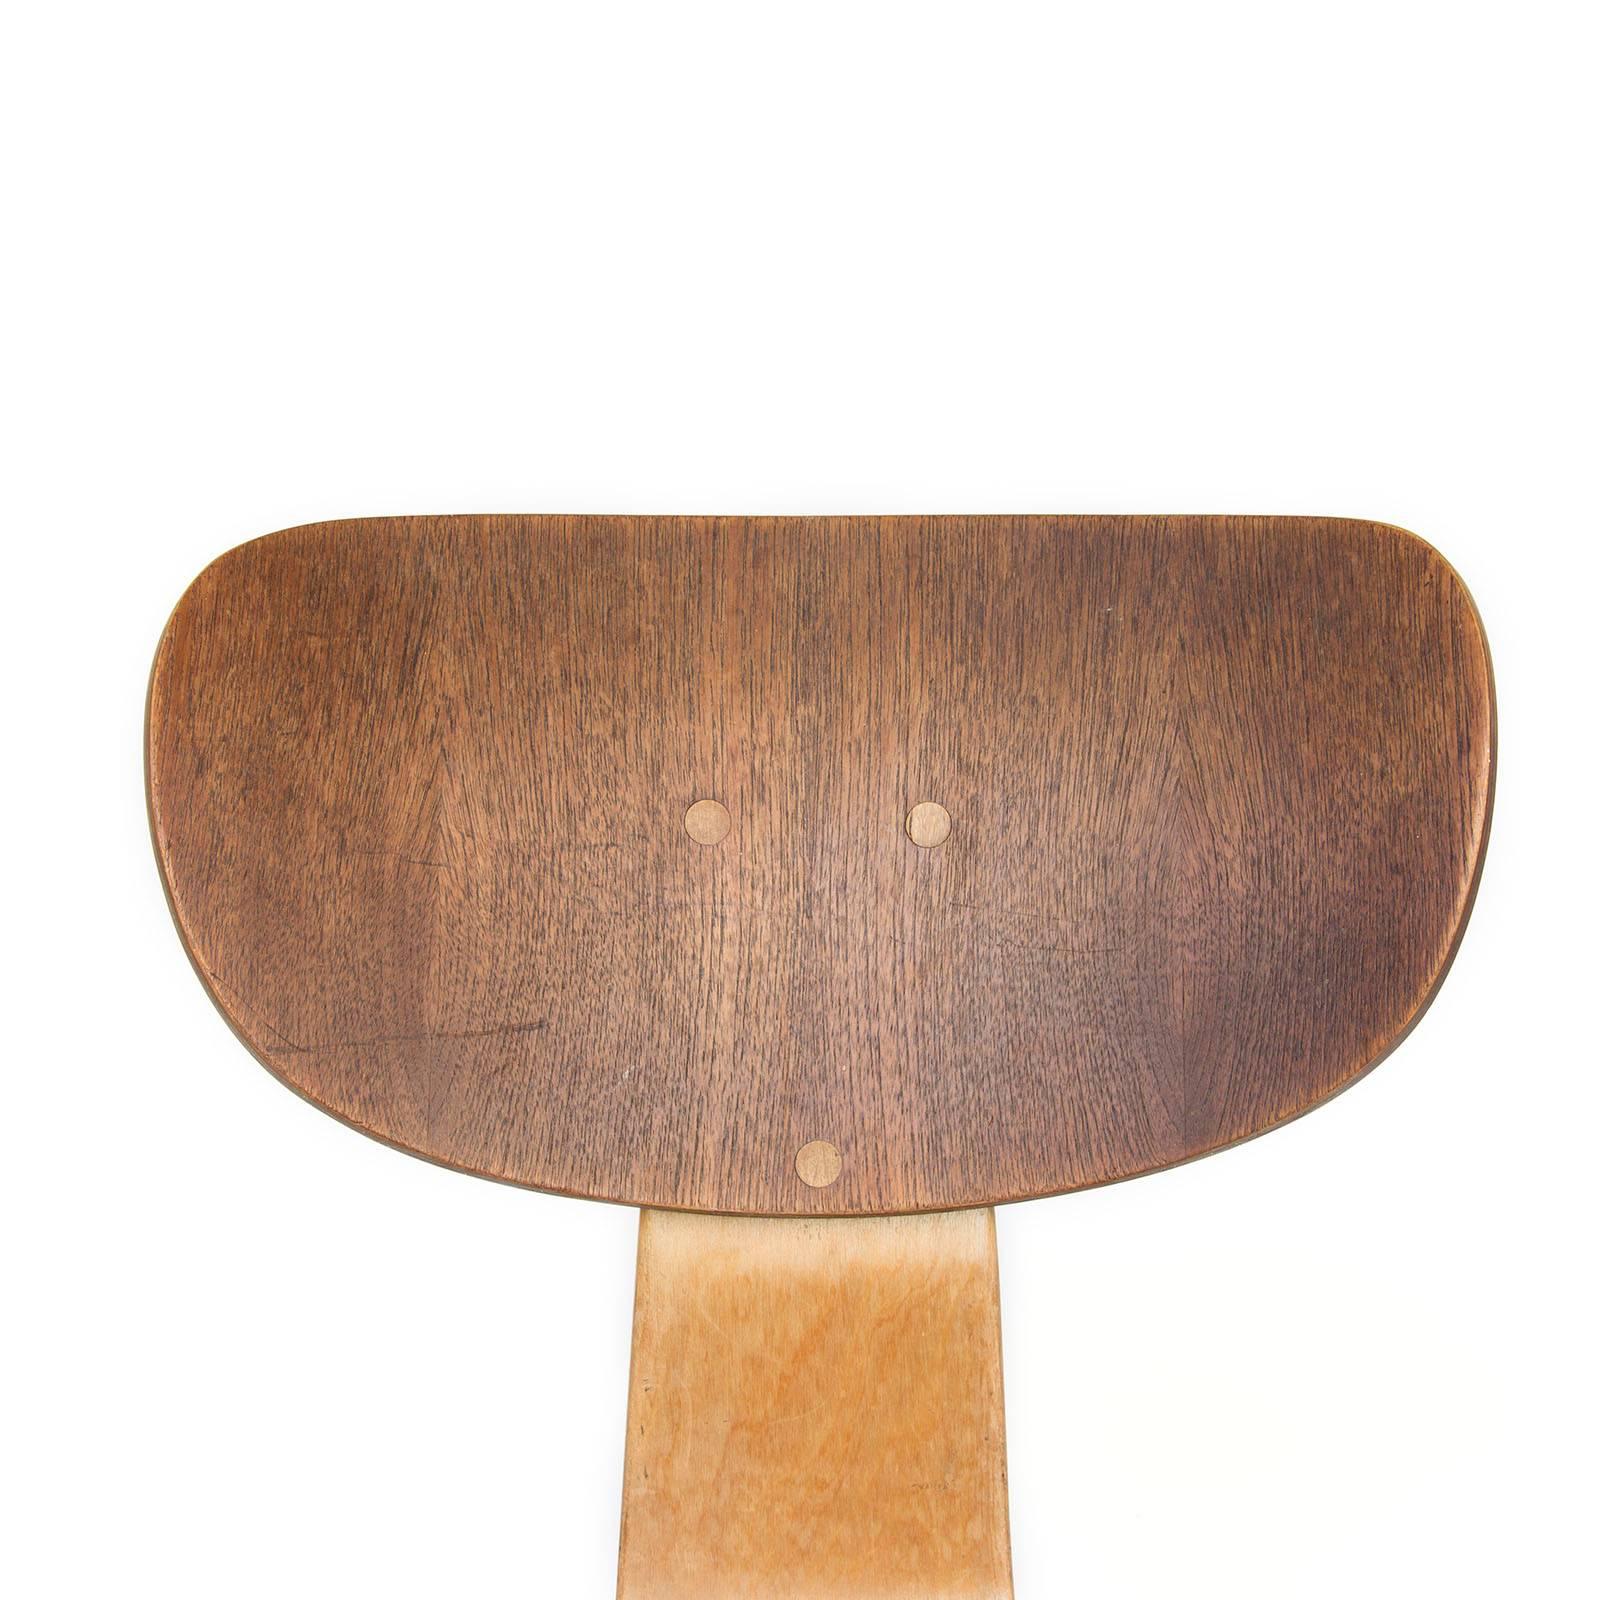 Dutch 1952, Cees Braakman for UMS Pastoe, Netherlands, SB02 Chair 